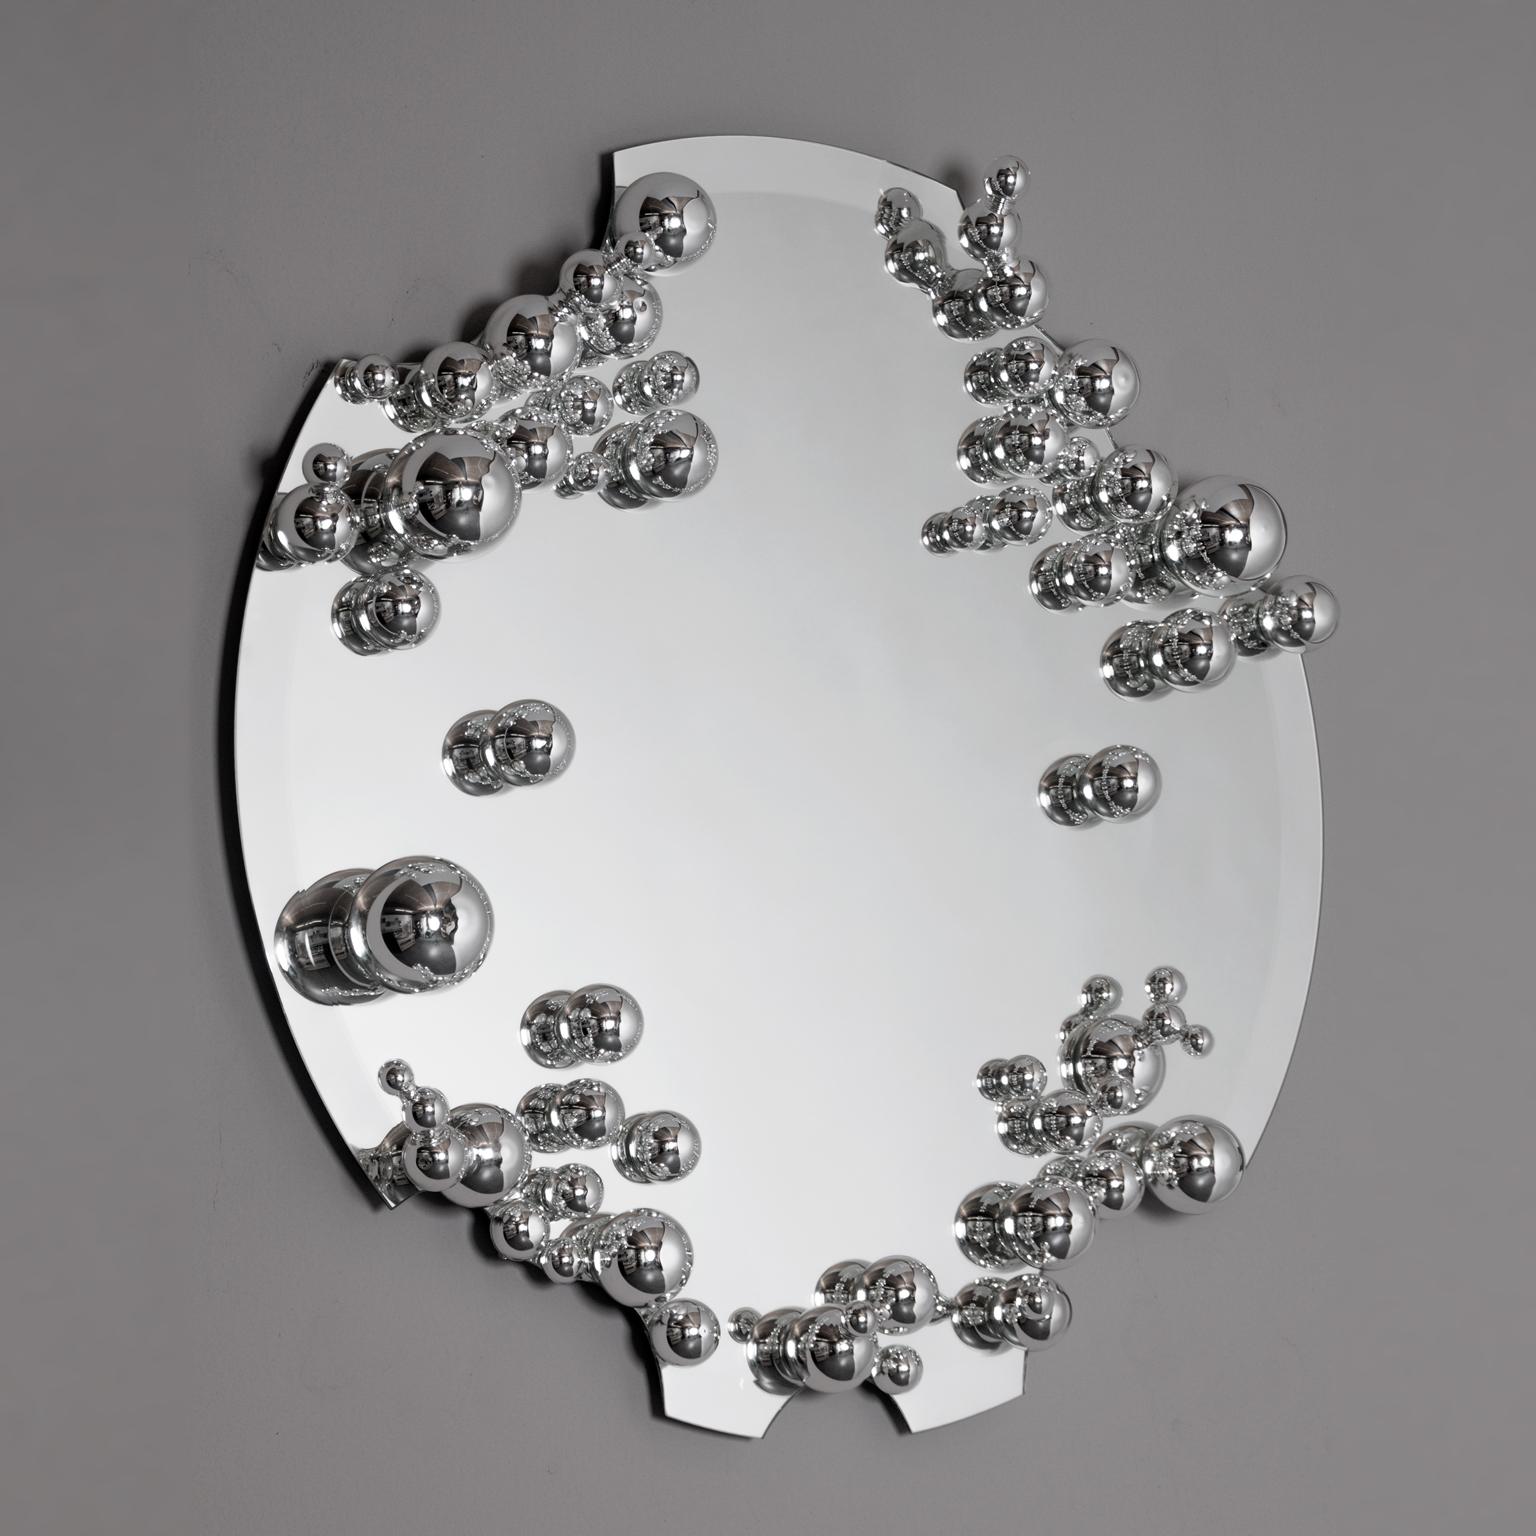 The mirror, carefully cut by hand, explores the dichotomy between object and reflection. The work is adorned with delicate bubbles of silvered glass with the traditional Venetian techniques that play between reality and reflection thanks also to a